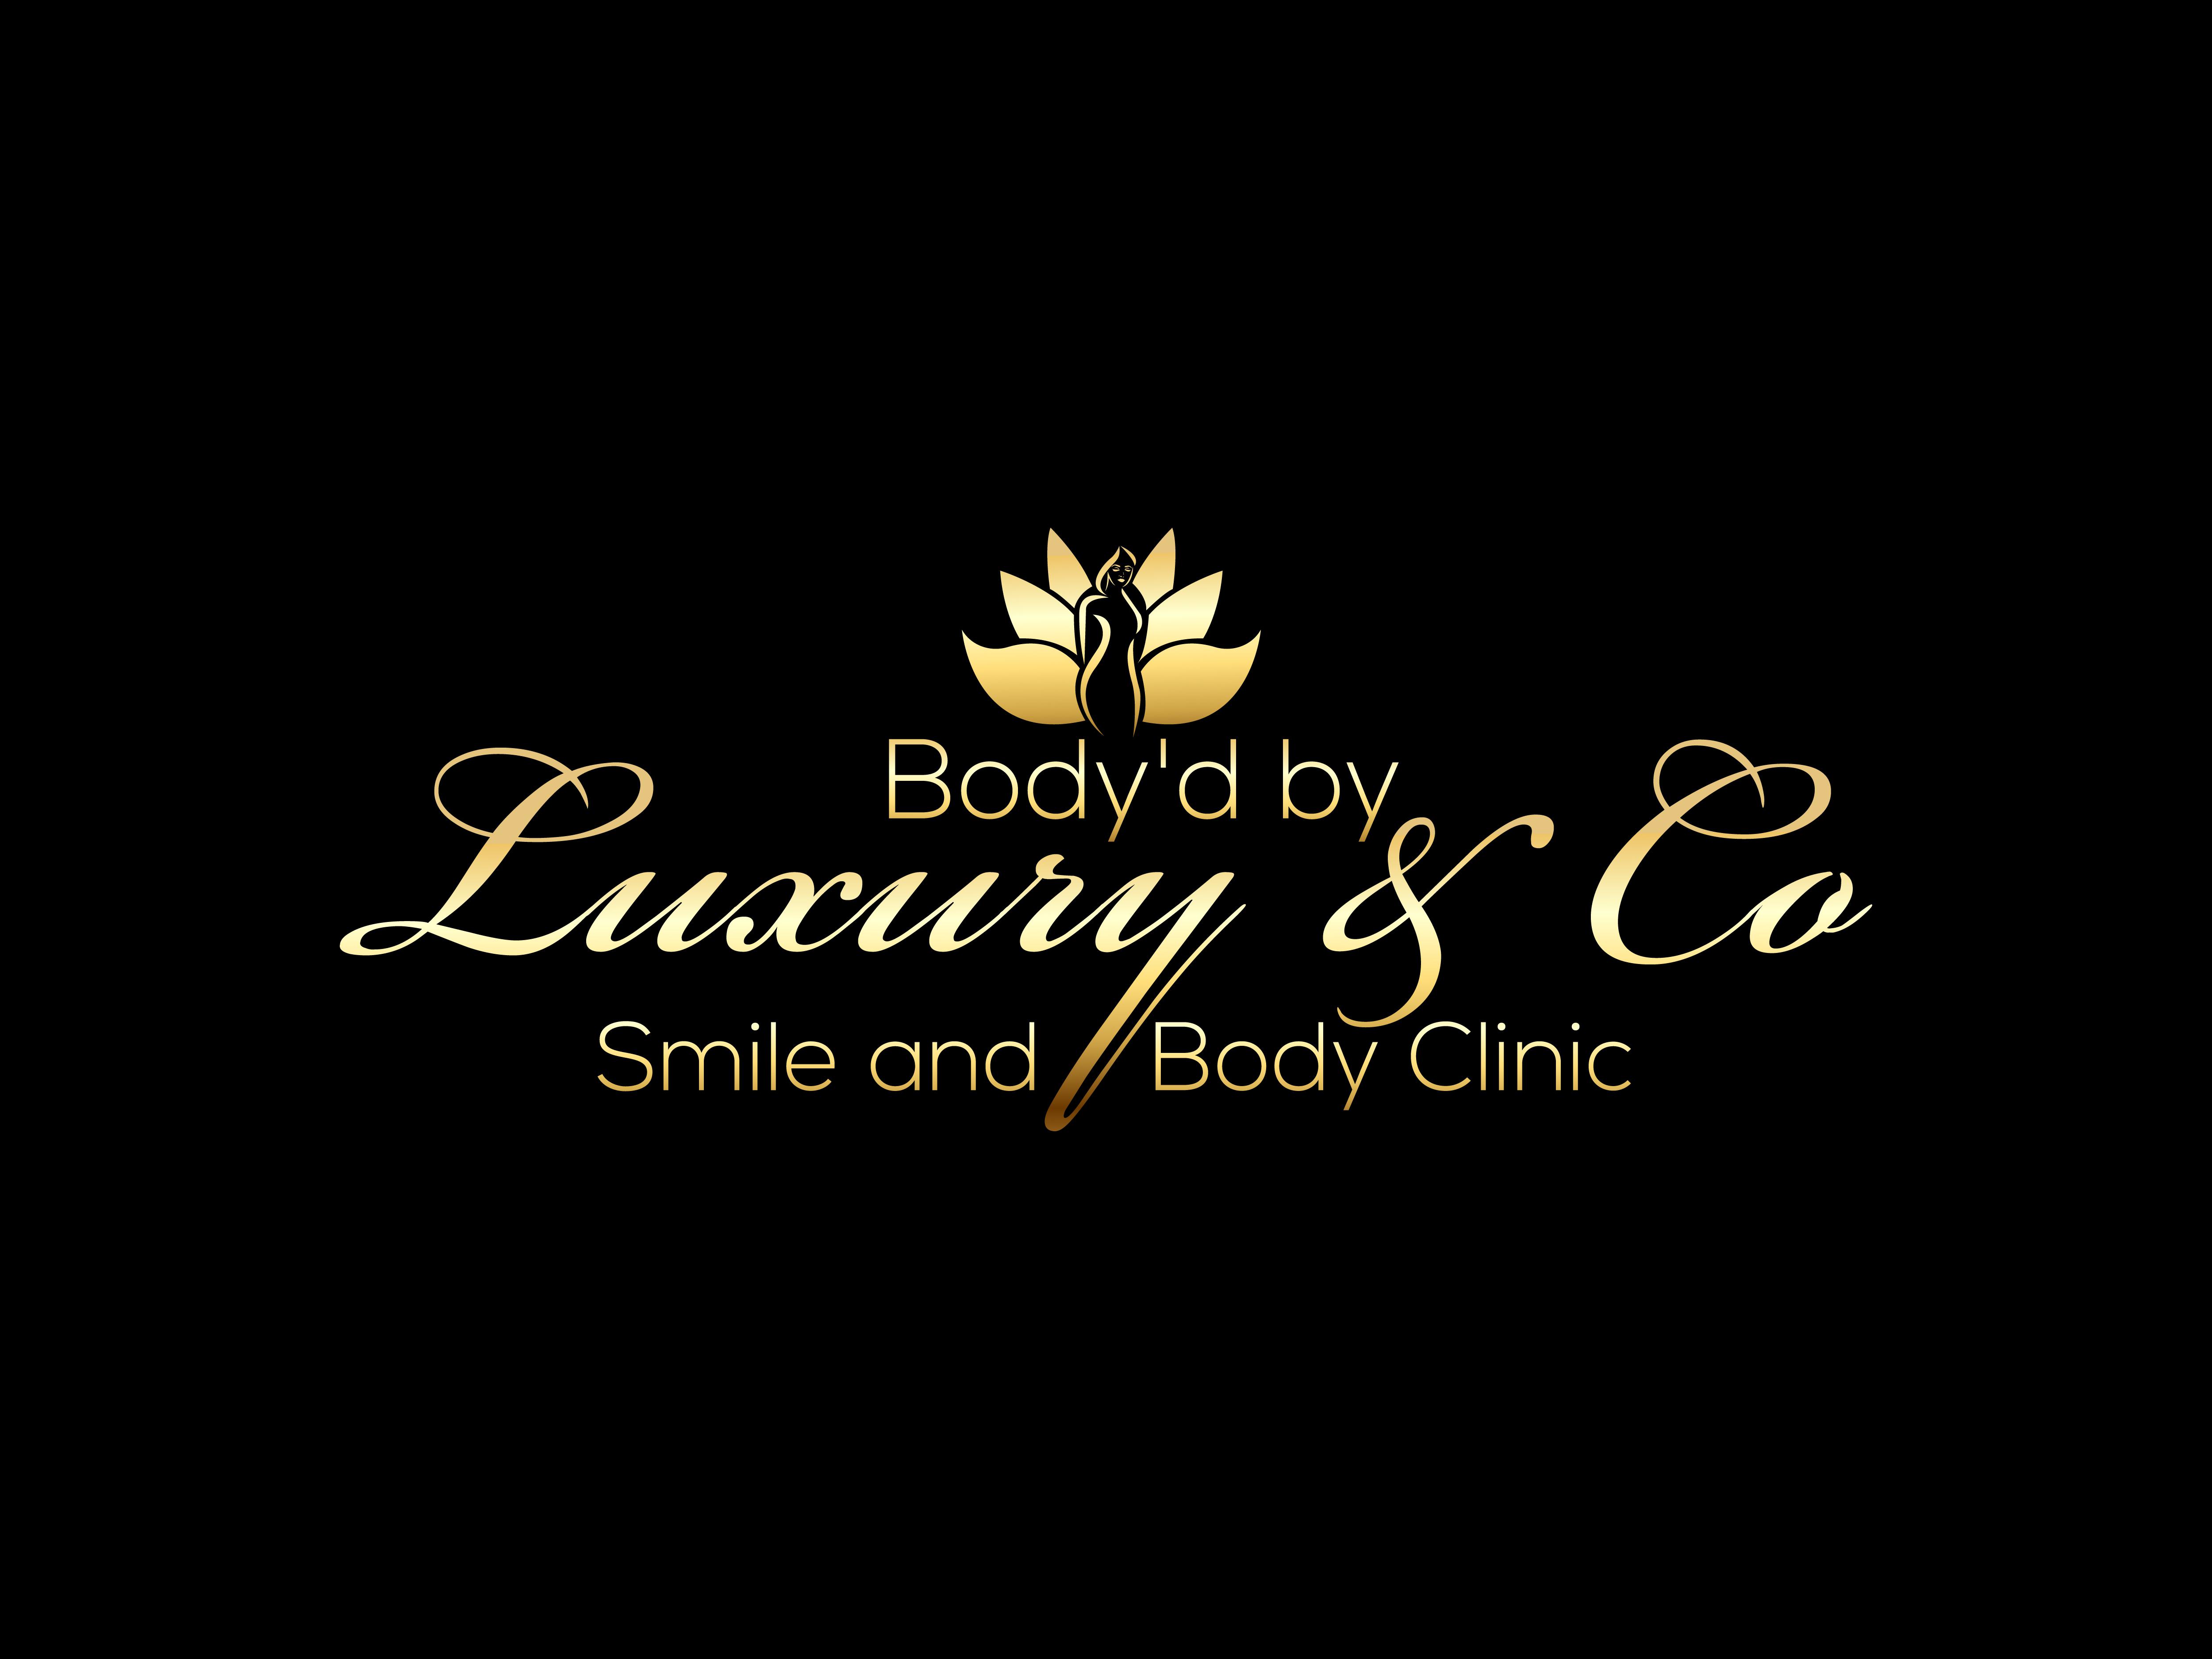 Body'd by Luxury & Co Smile and Body clinic Logo